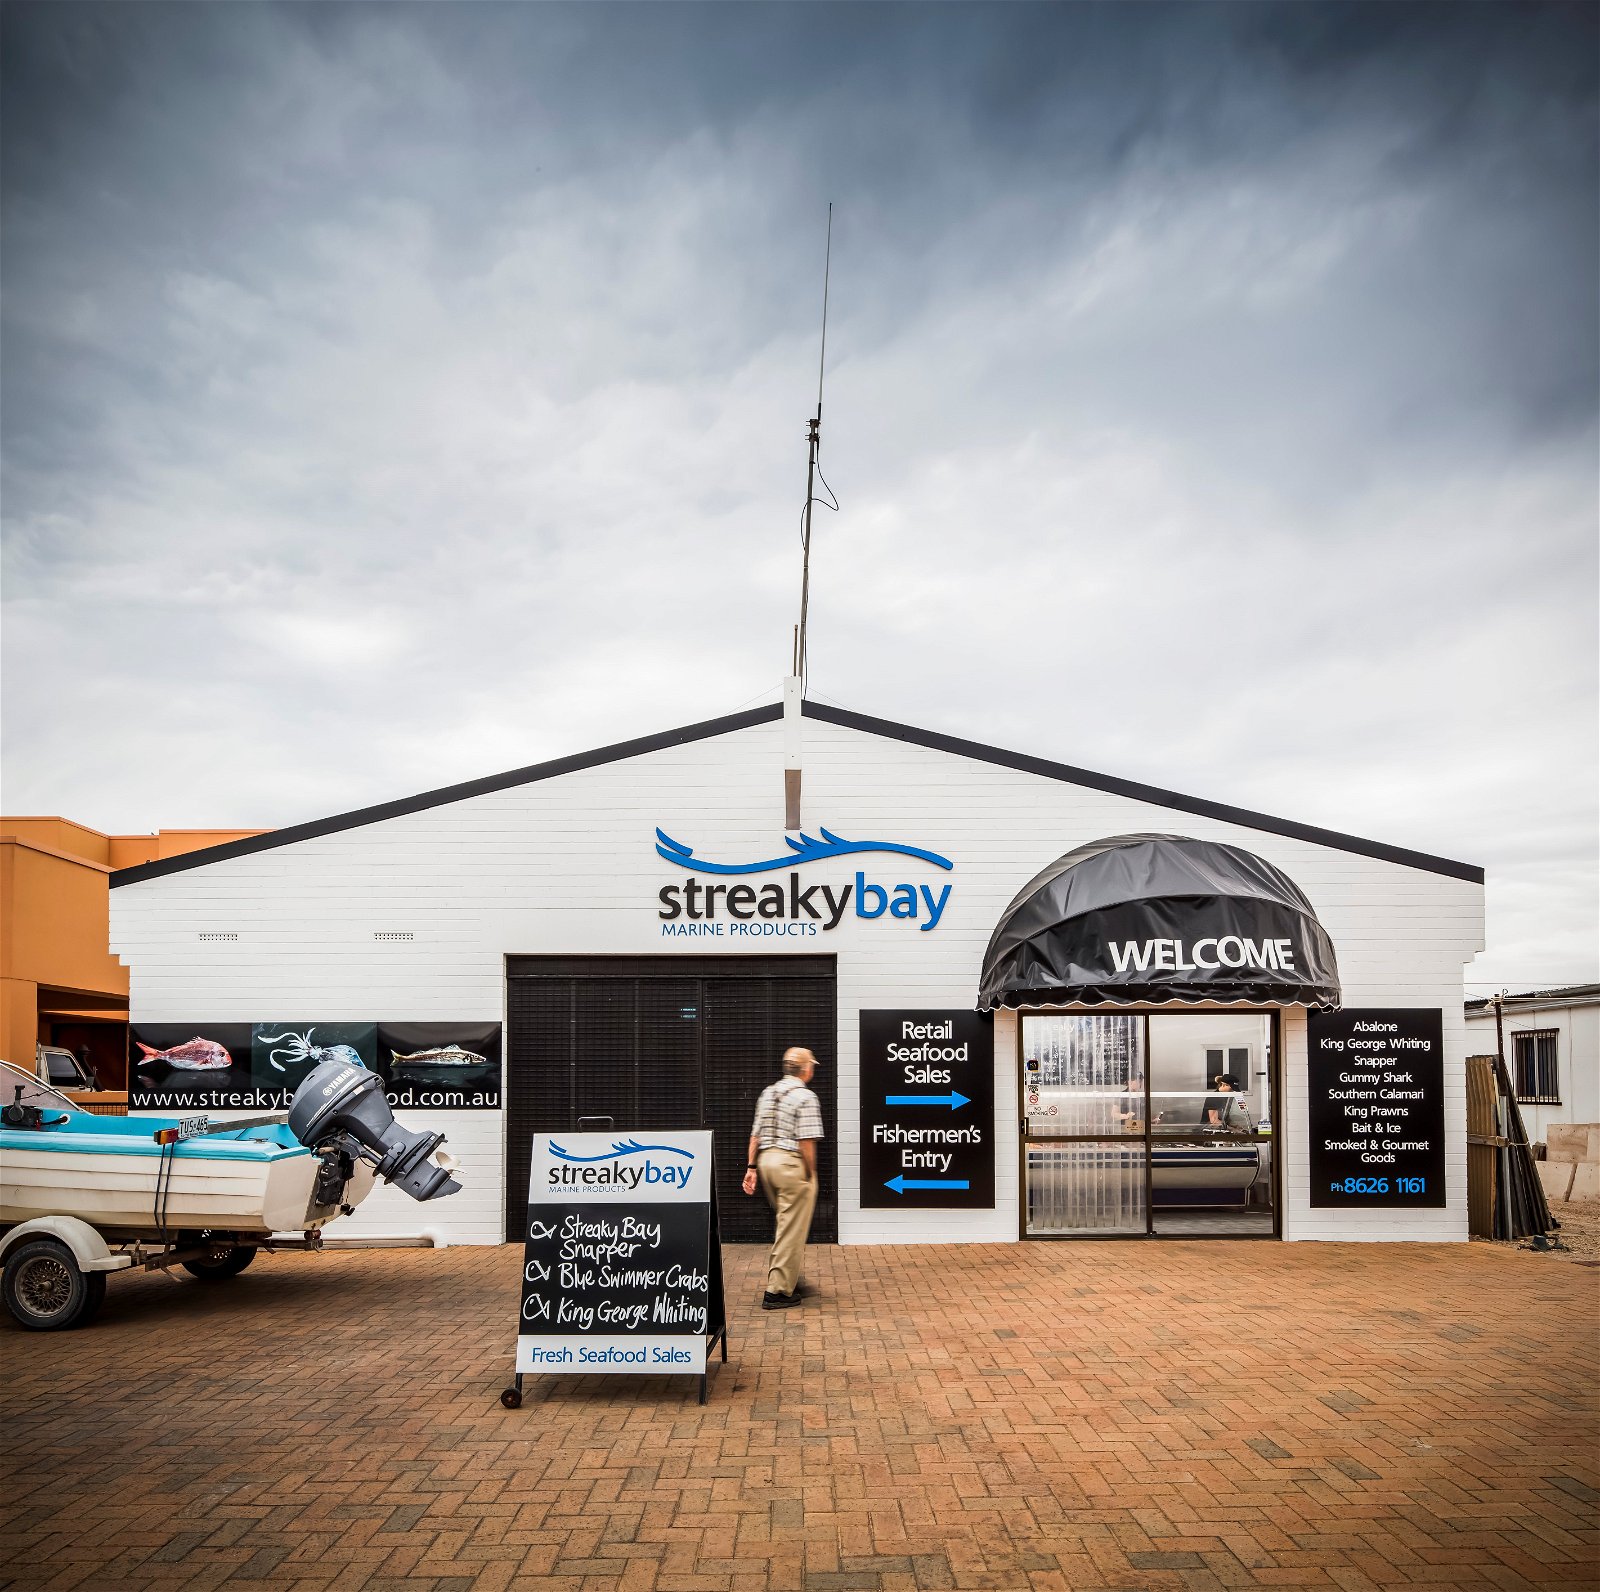 Streaky Bay Marine Products - Great Ocean Road Tourism